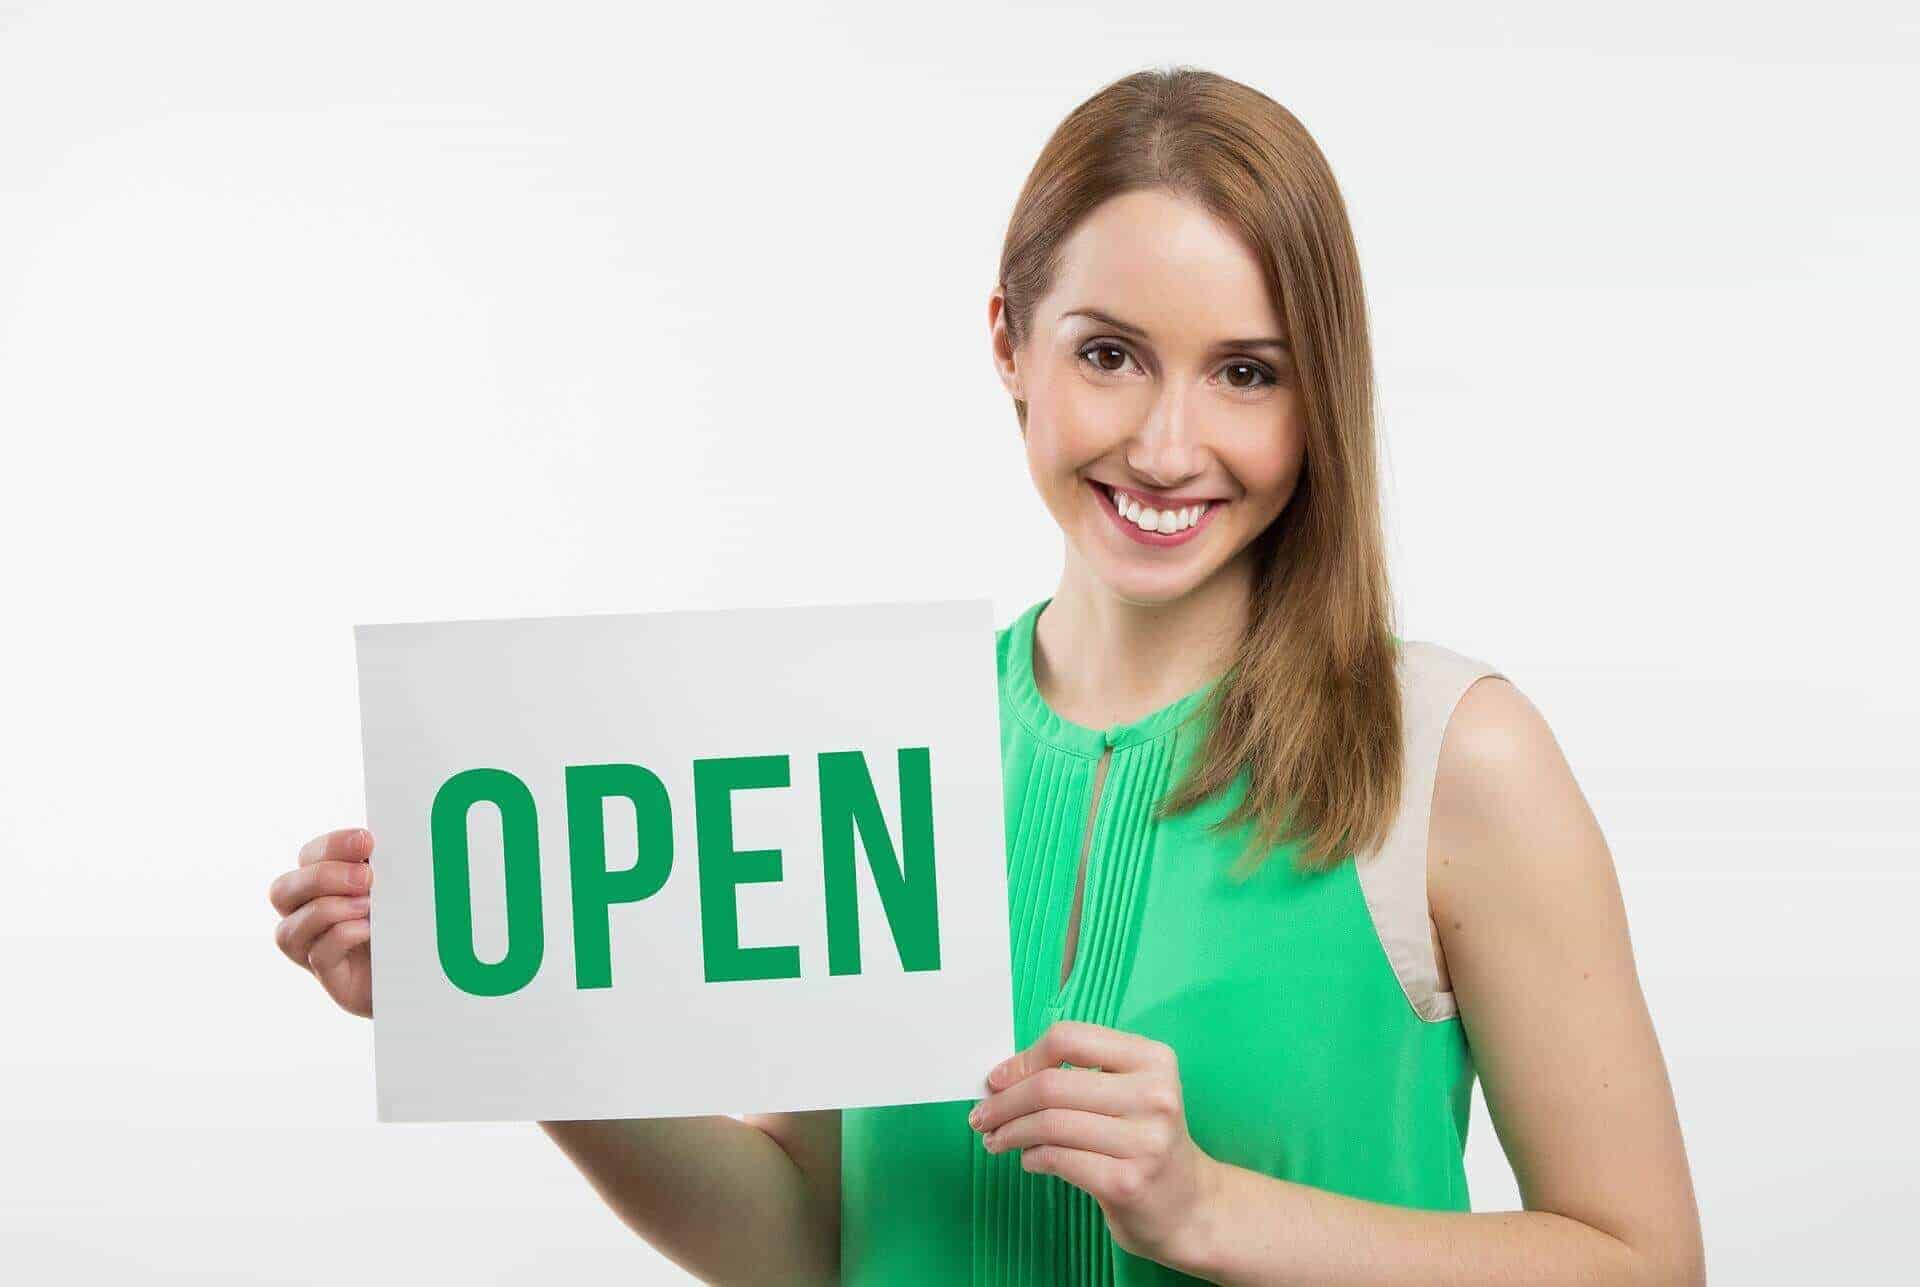 Woman holding a sign on royalty-free image with the inscription "Open"